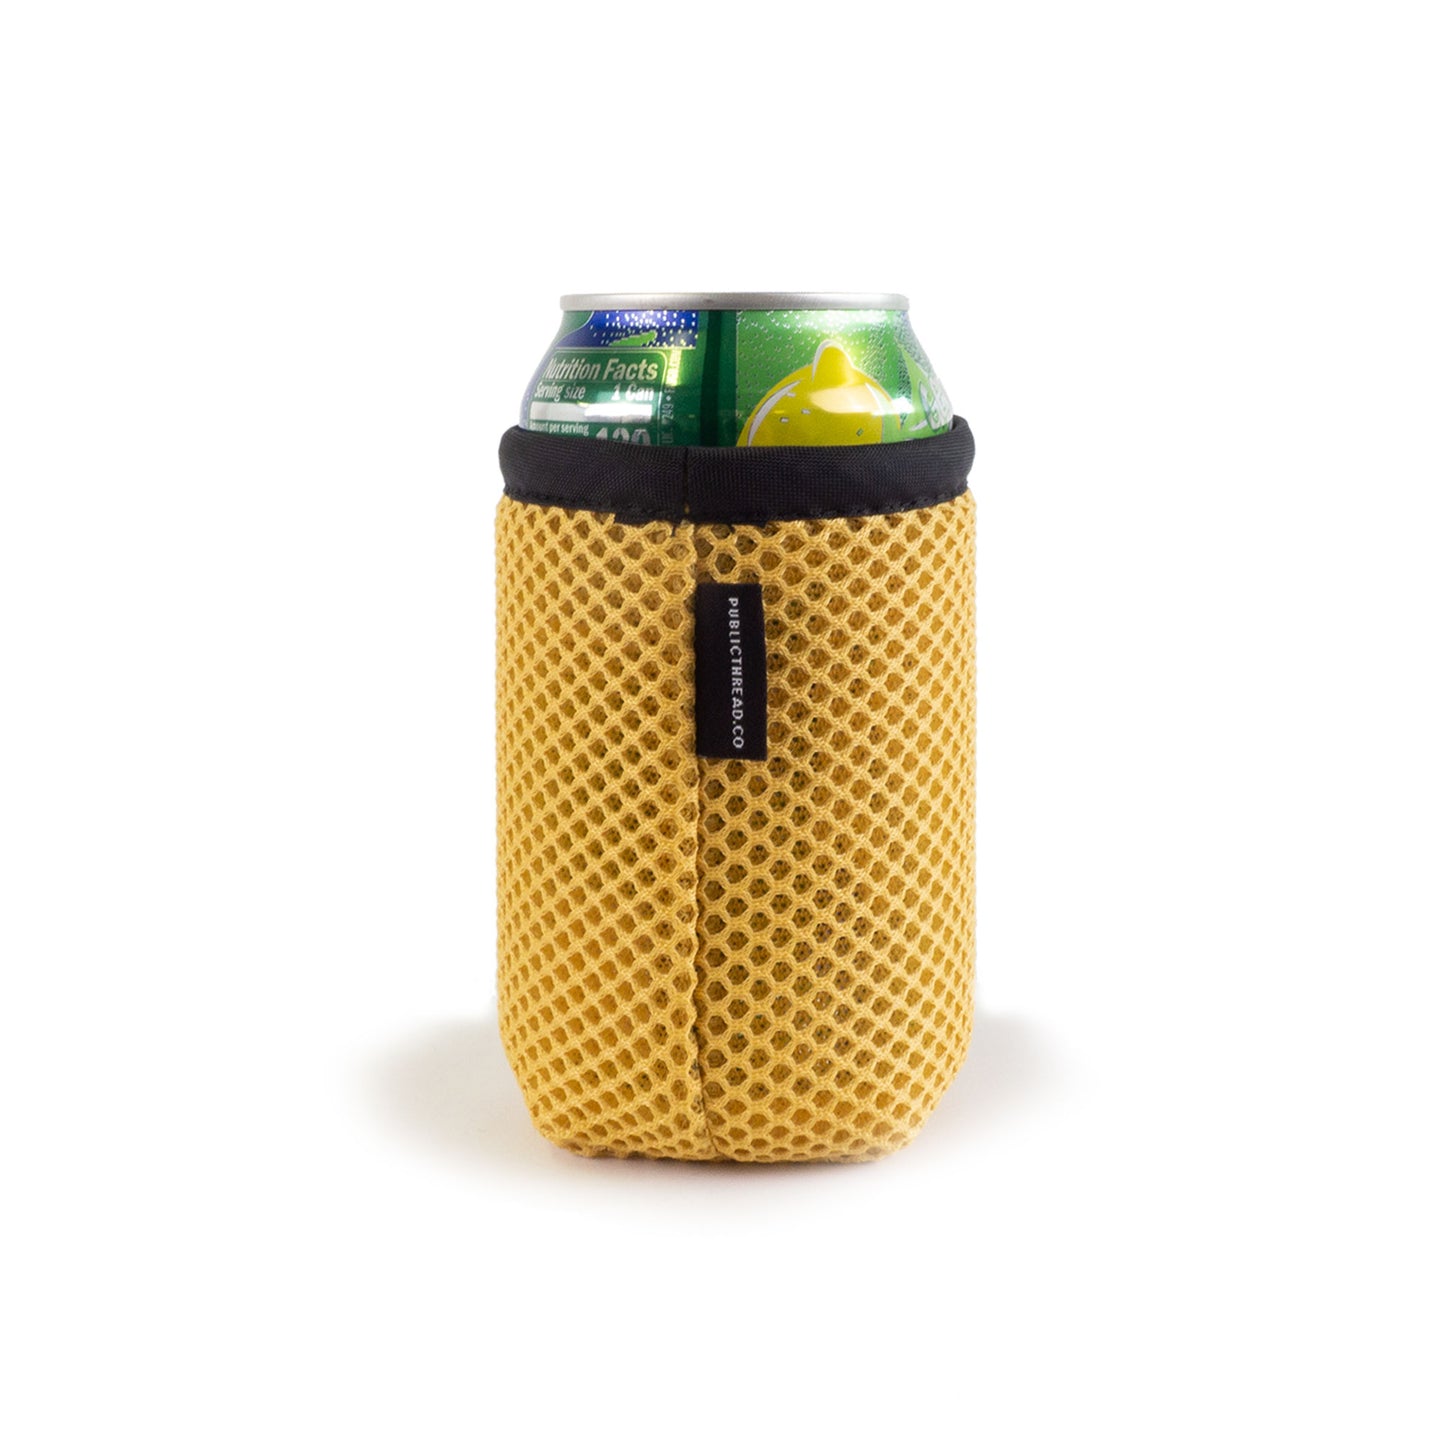 The 3D Koozie<br>Yellow